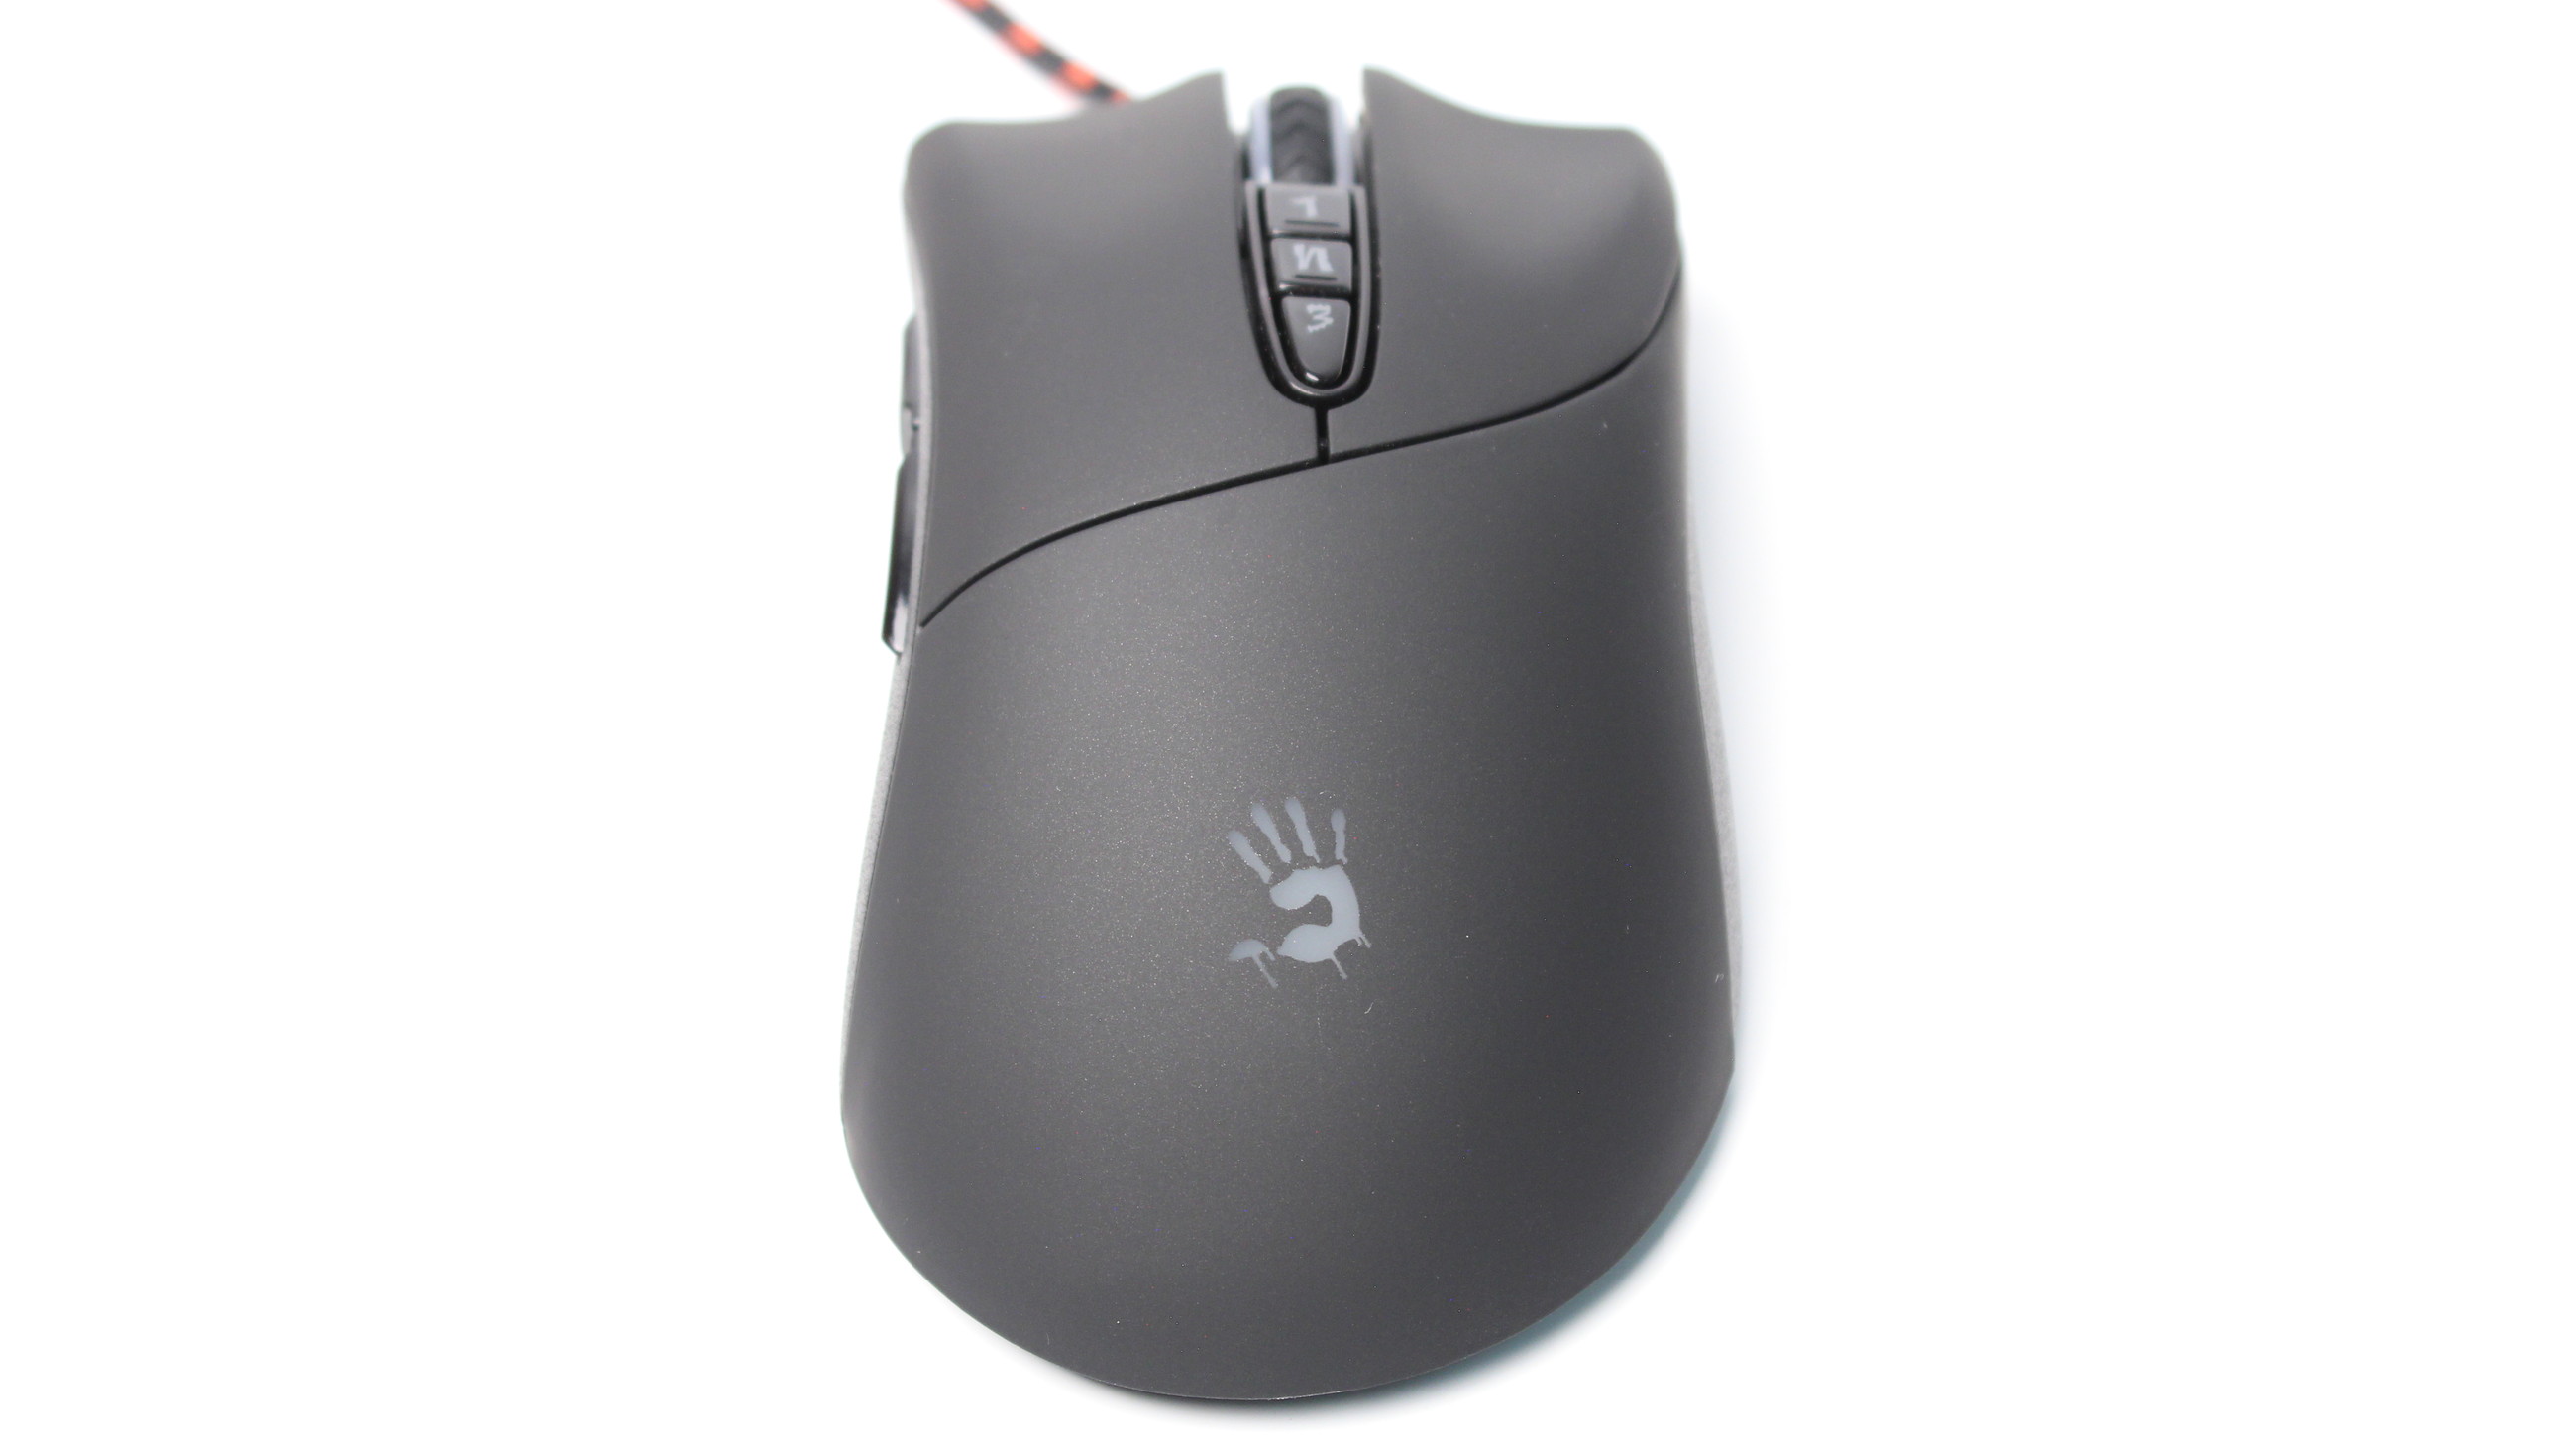 Eac blacklisted device bloody mouse a4tech rust фото 41